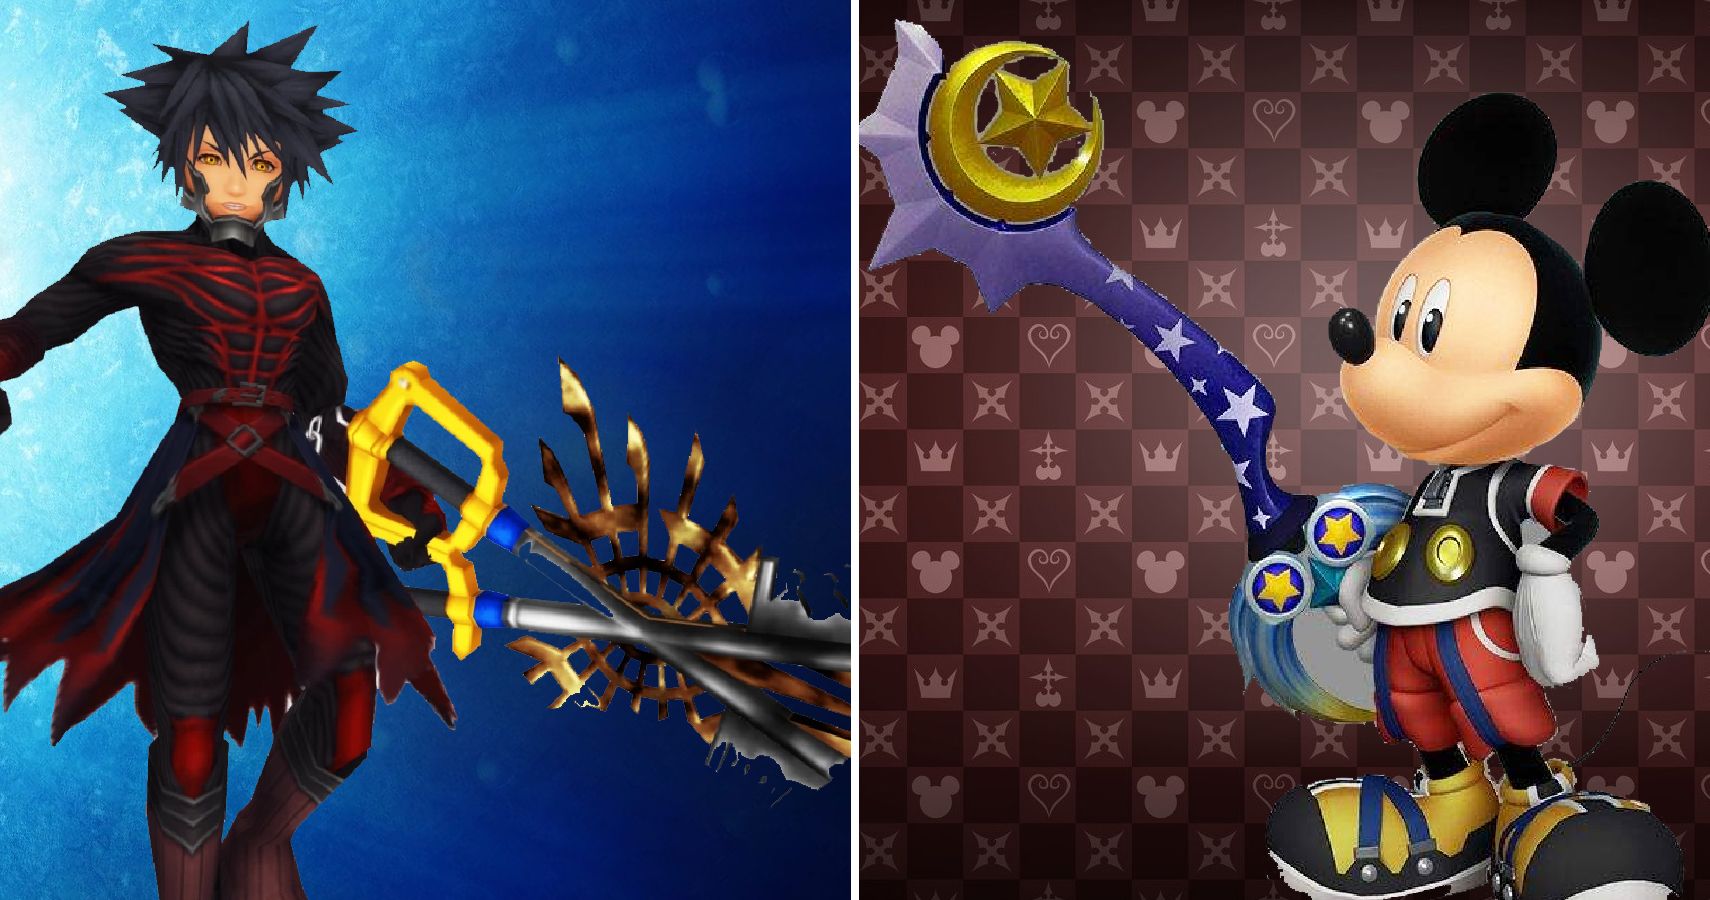 Kingdom Hearts Keyblades The Best And Worst Weapons In The Series